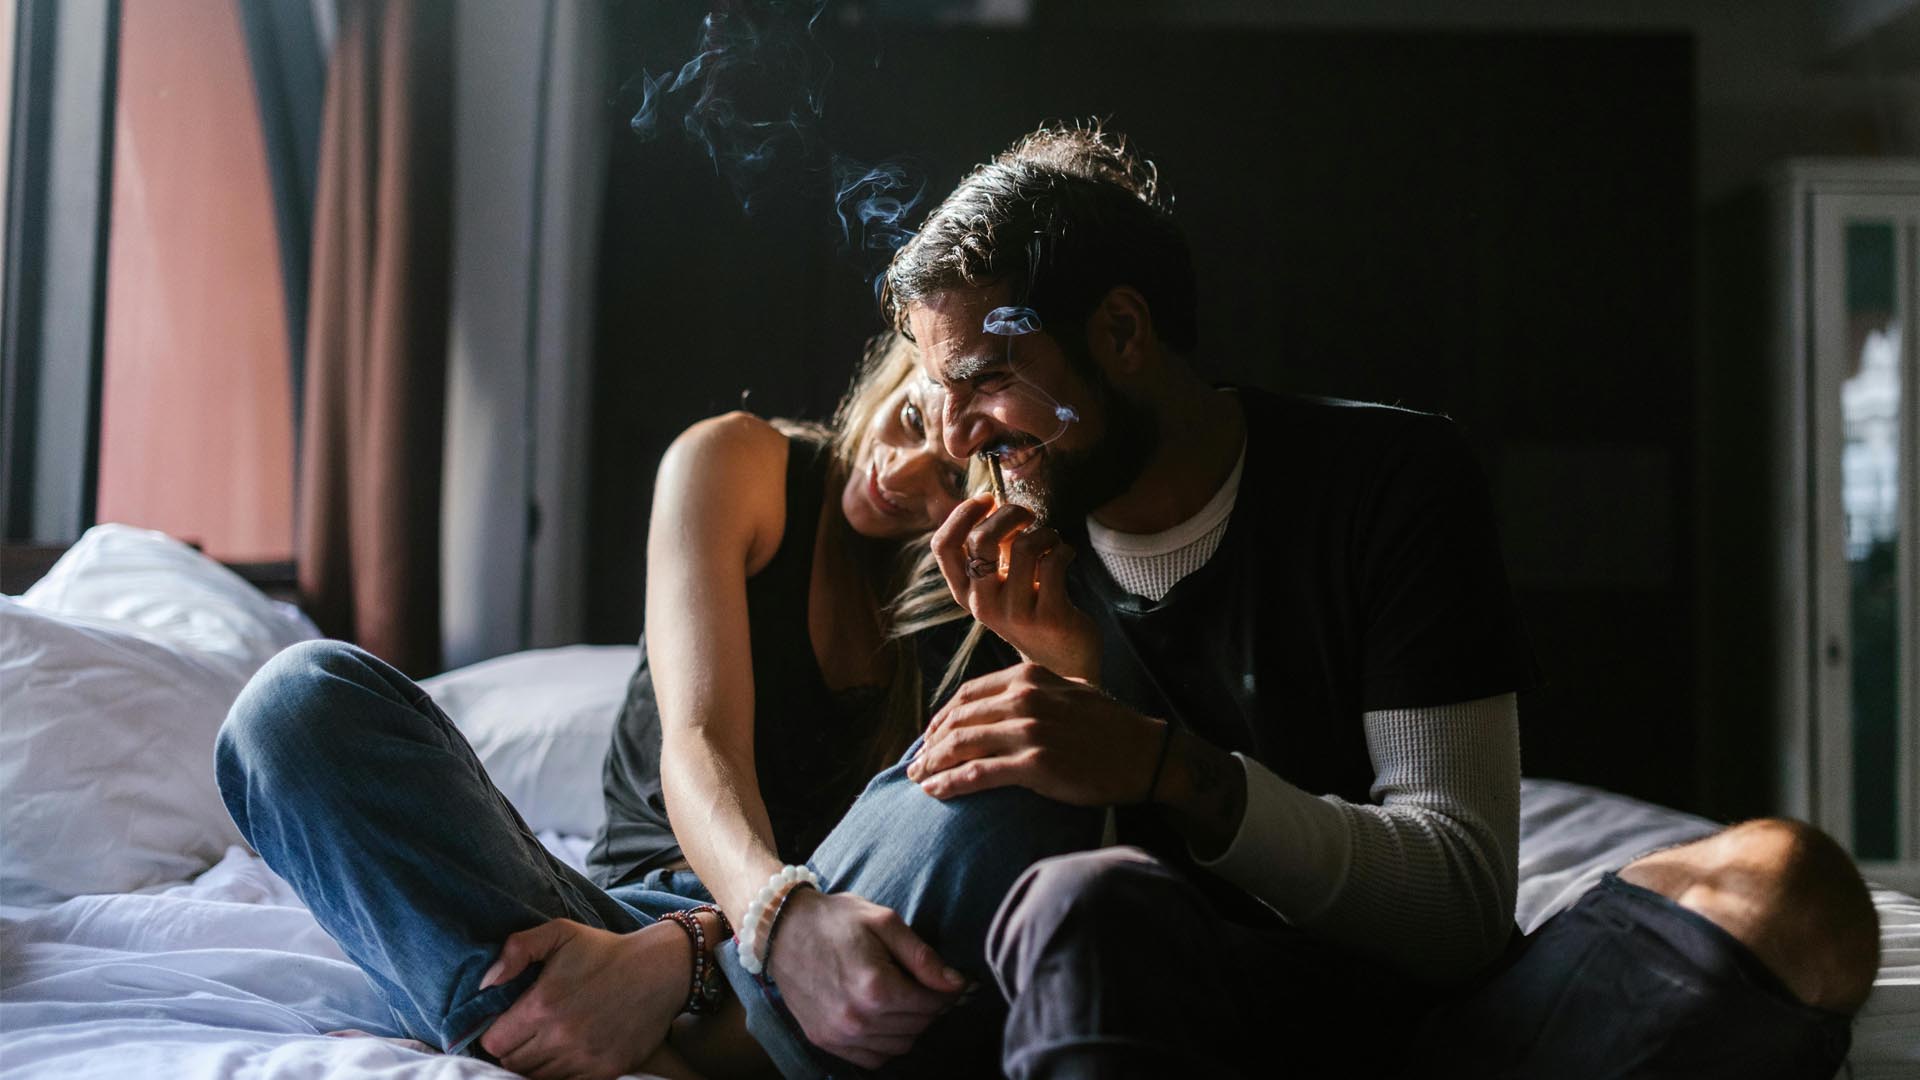 Man and woman smoking cannabis in bed